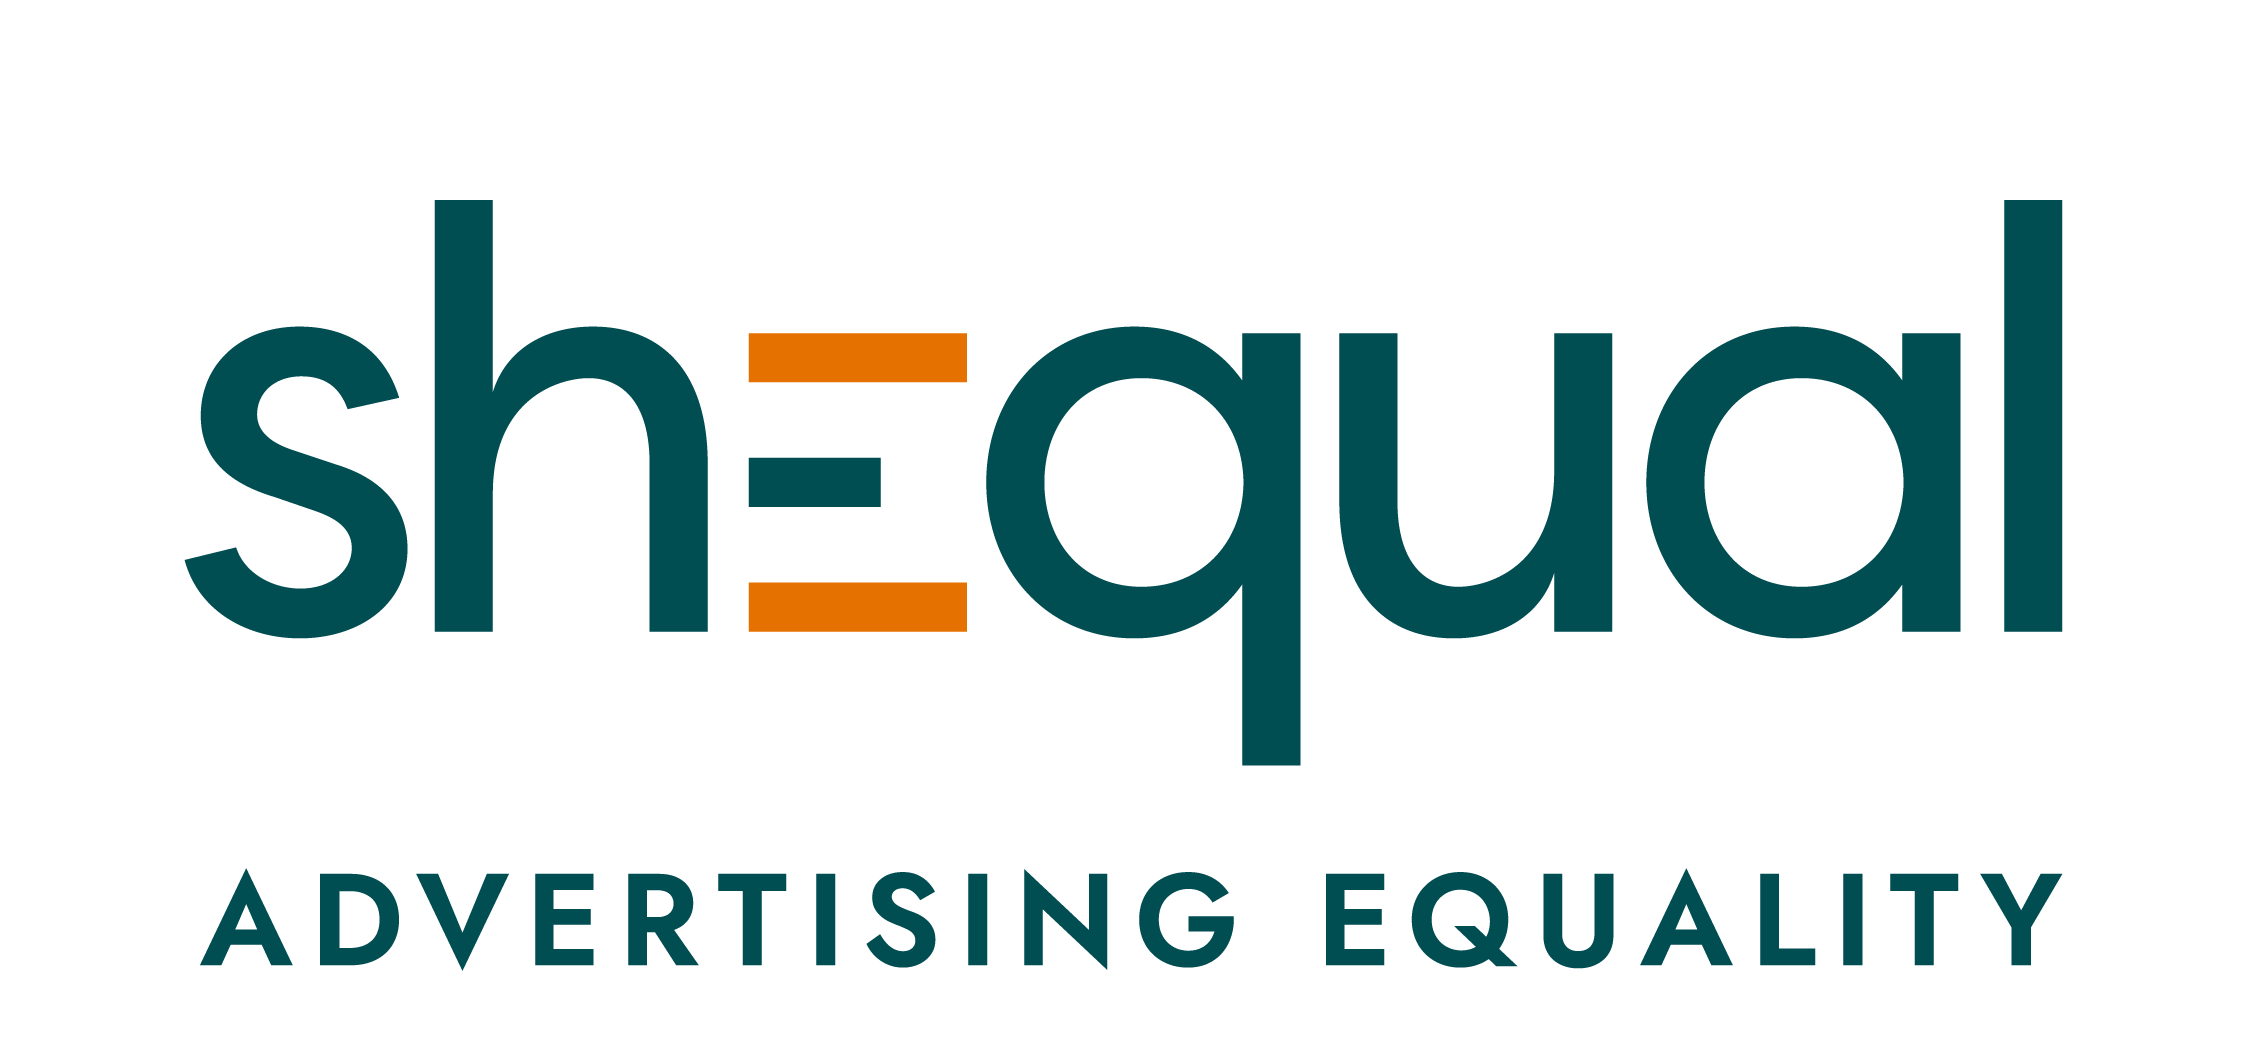 Logo of the brand shEqual. In the word 'shequal' is in a dark teal colour but the crosses of the capital 'E' in the middle is gold- like an equal sign 